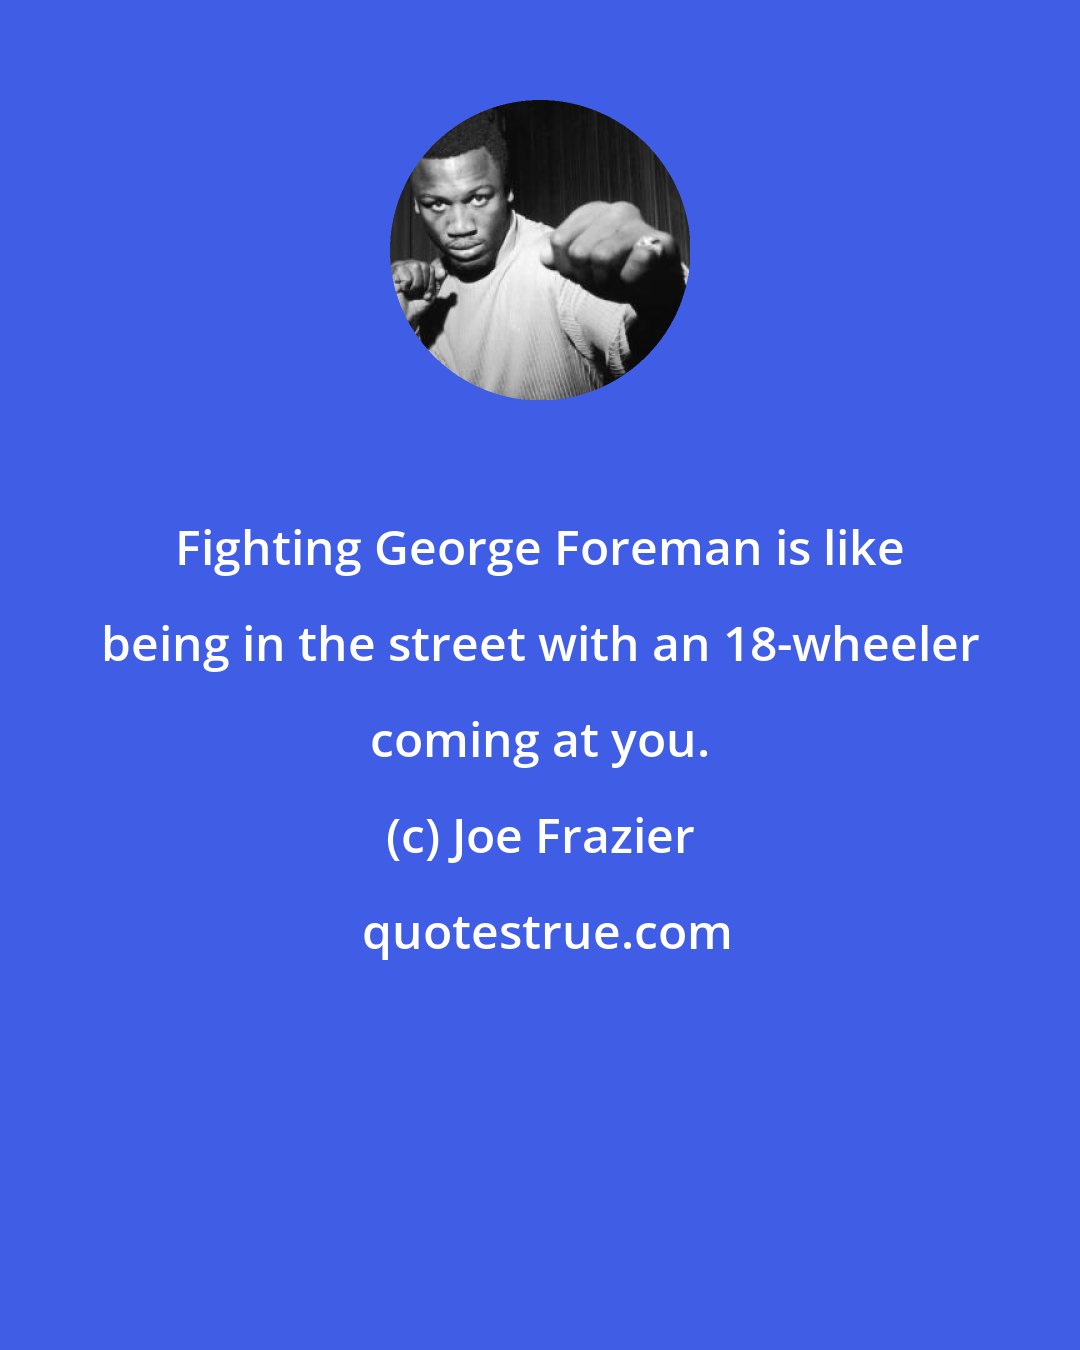 Joe Frazier: Fighting George Foreman is like being in the street with an 18-wheeler coming at you.